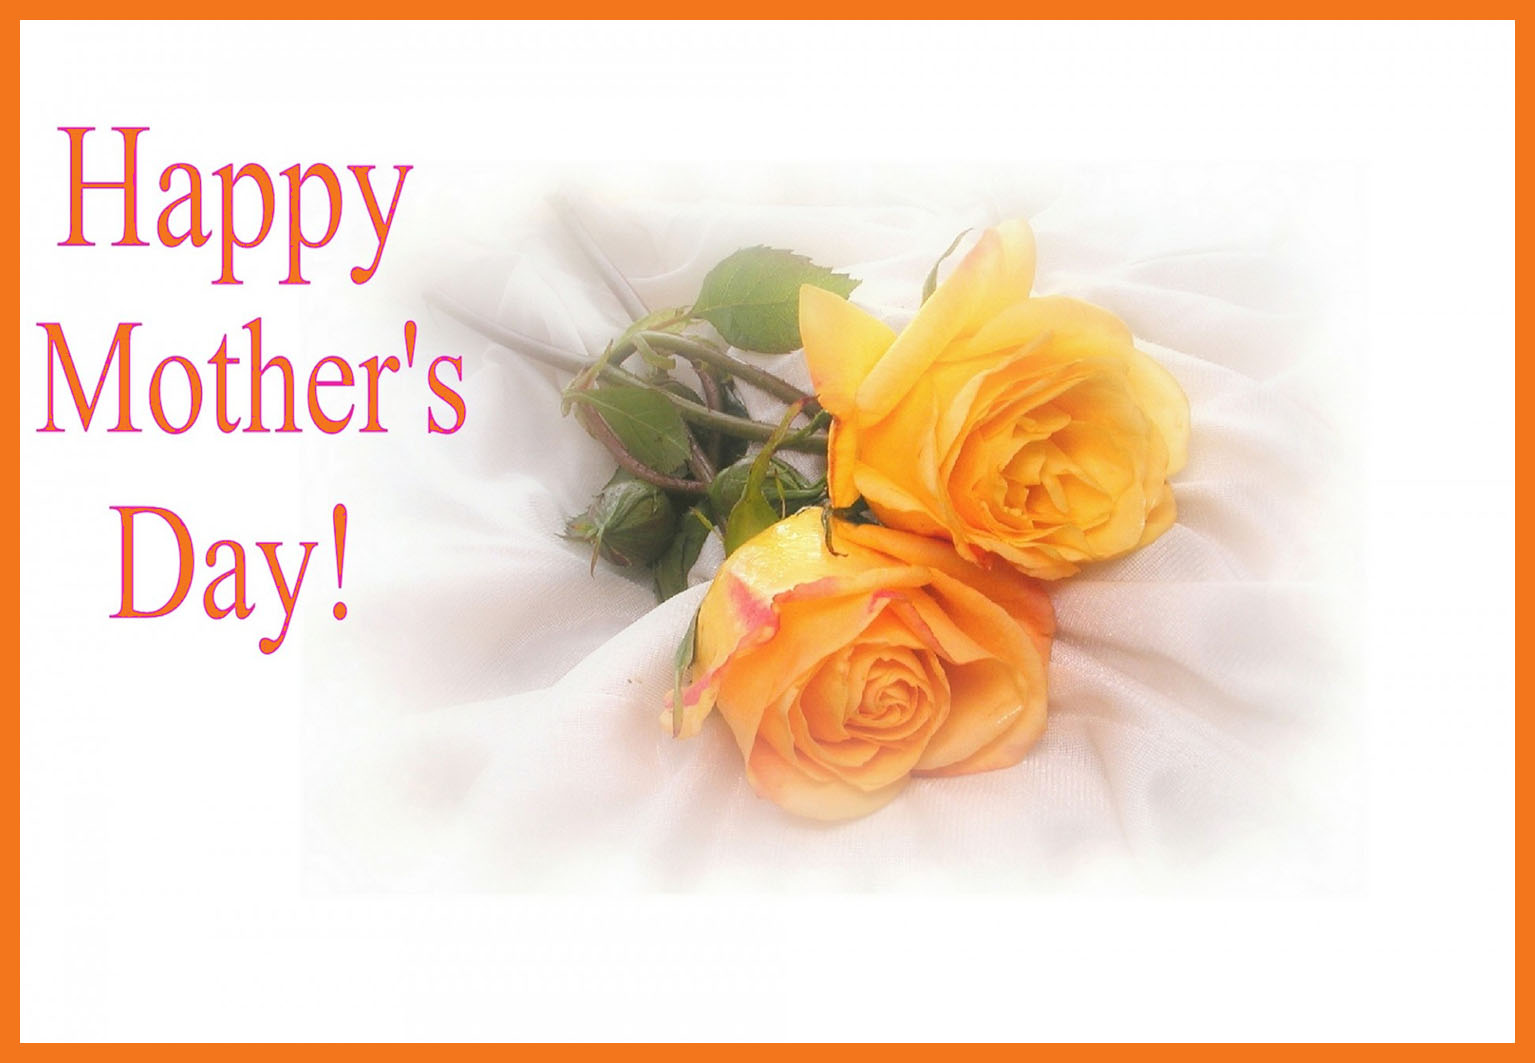 Mother's Day card with yellow roses